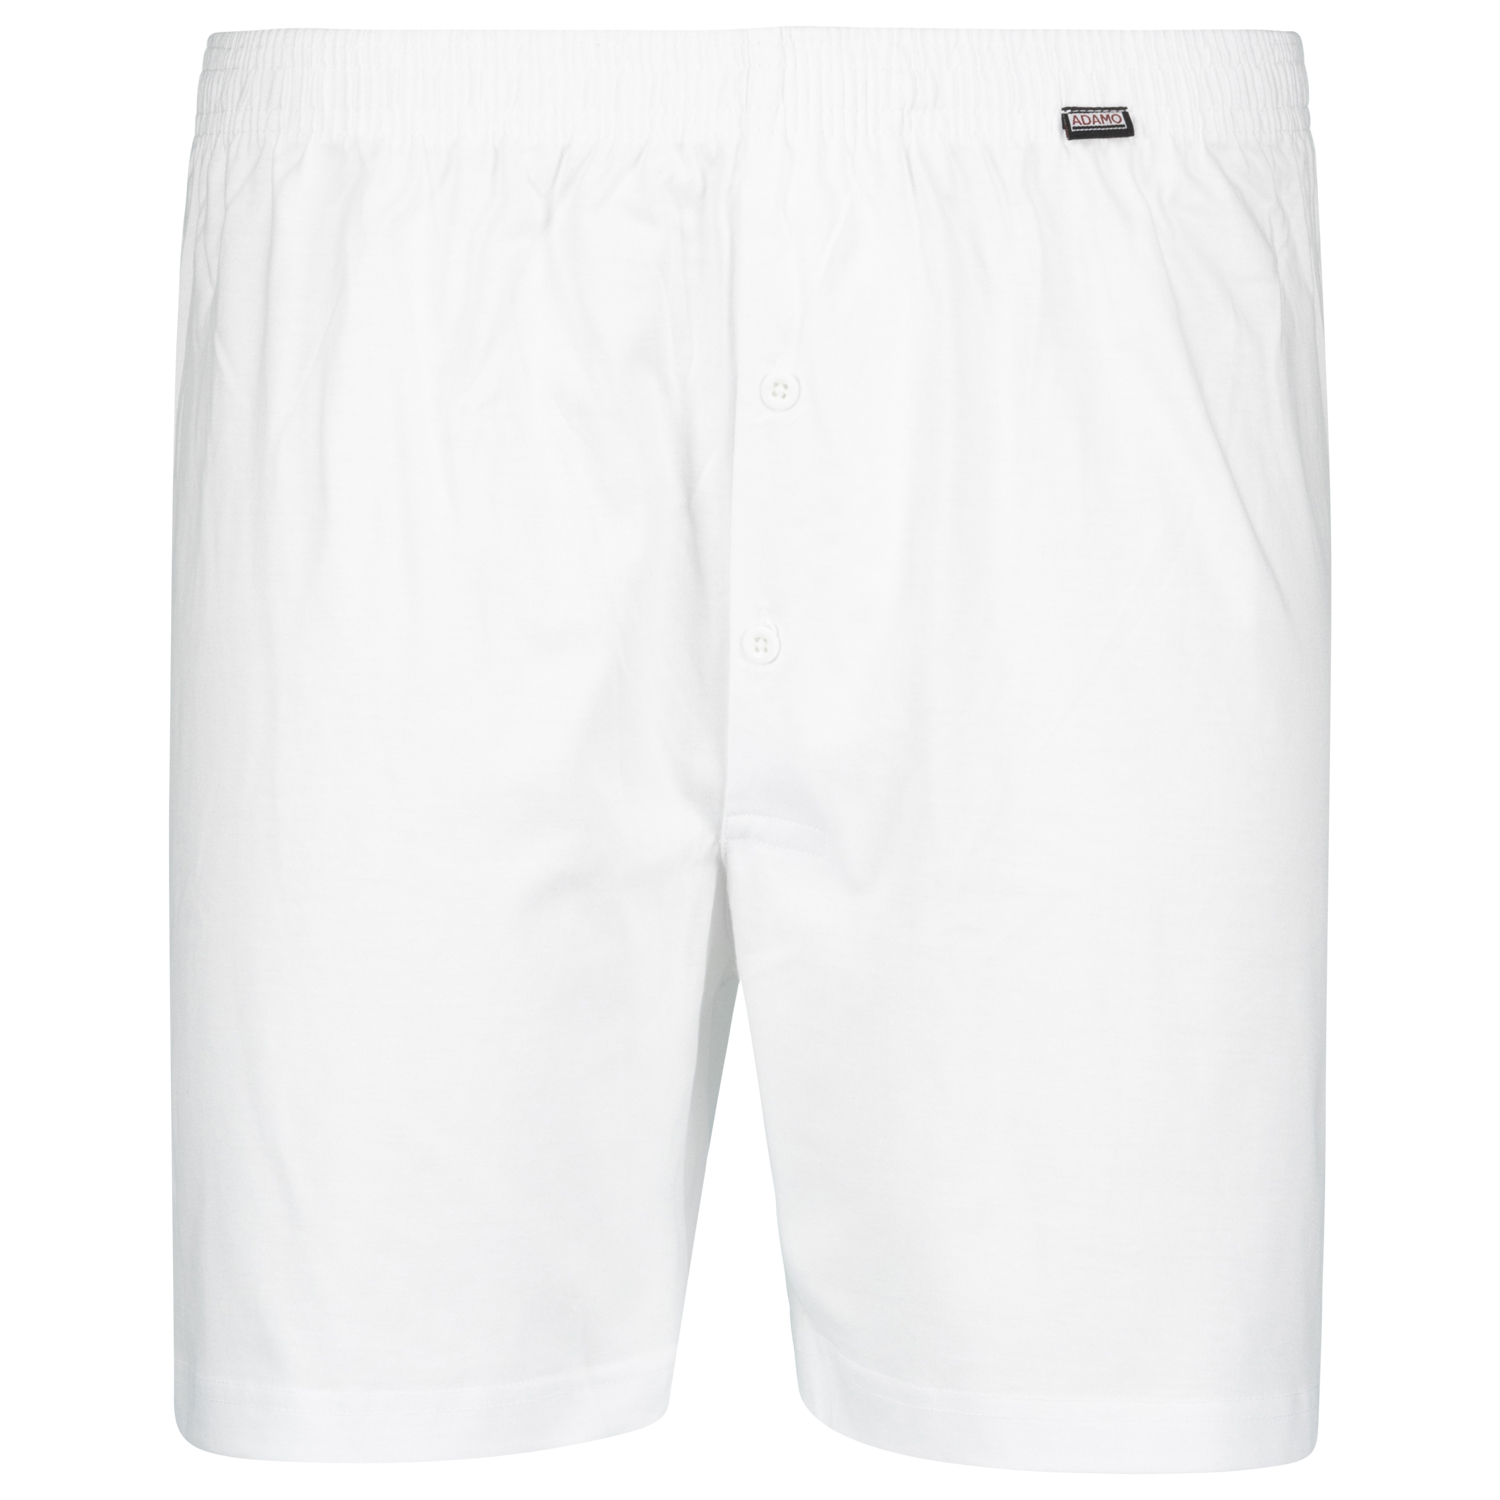 White triple pack "JAMES" boxershorts by ADAMO in large sizes up to 20